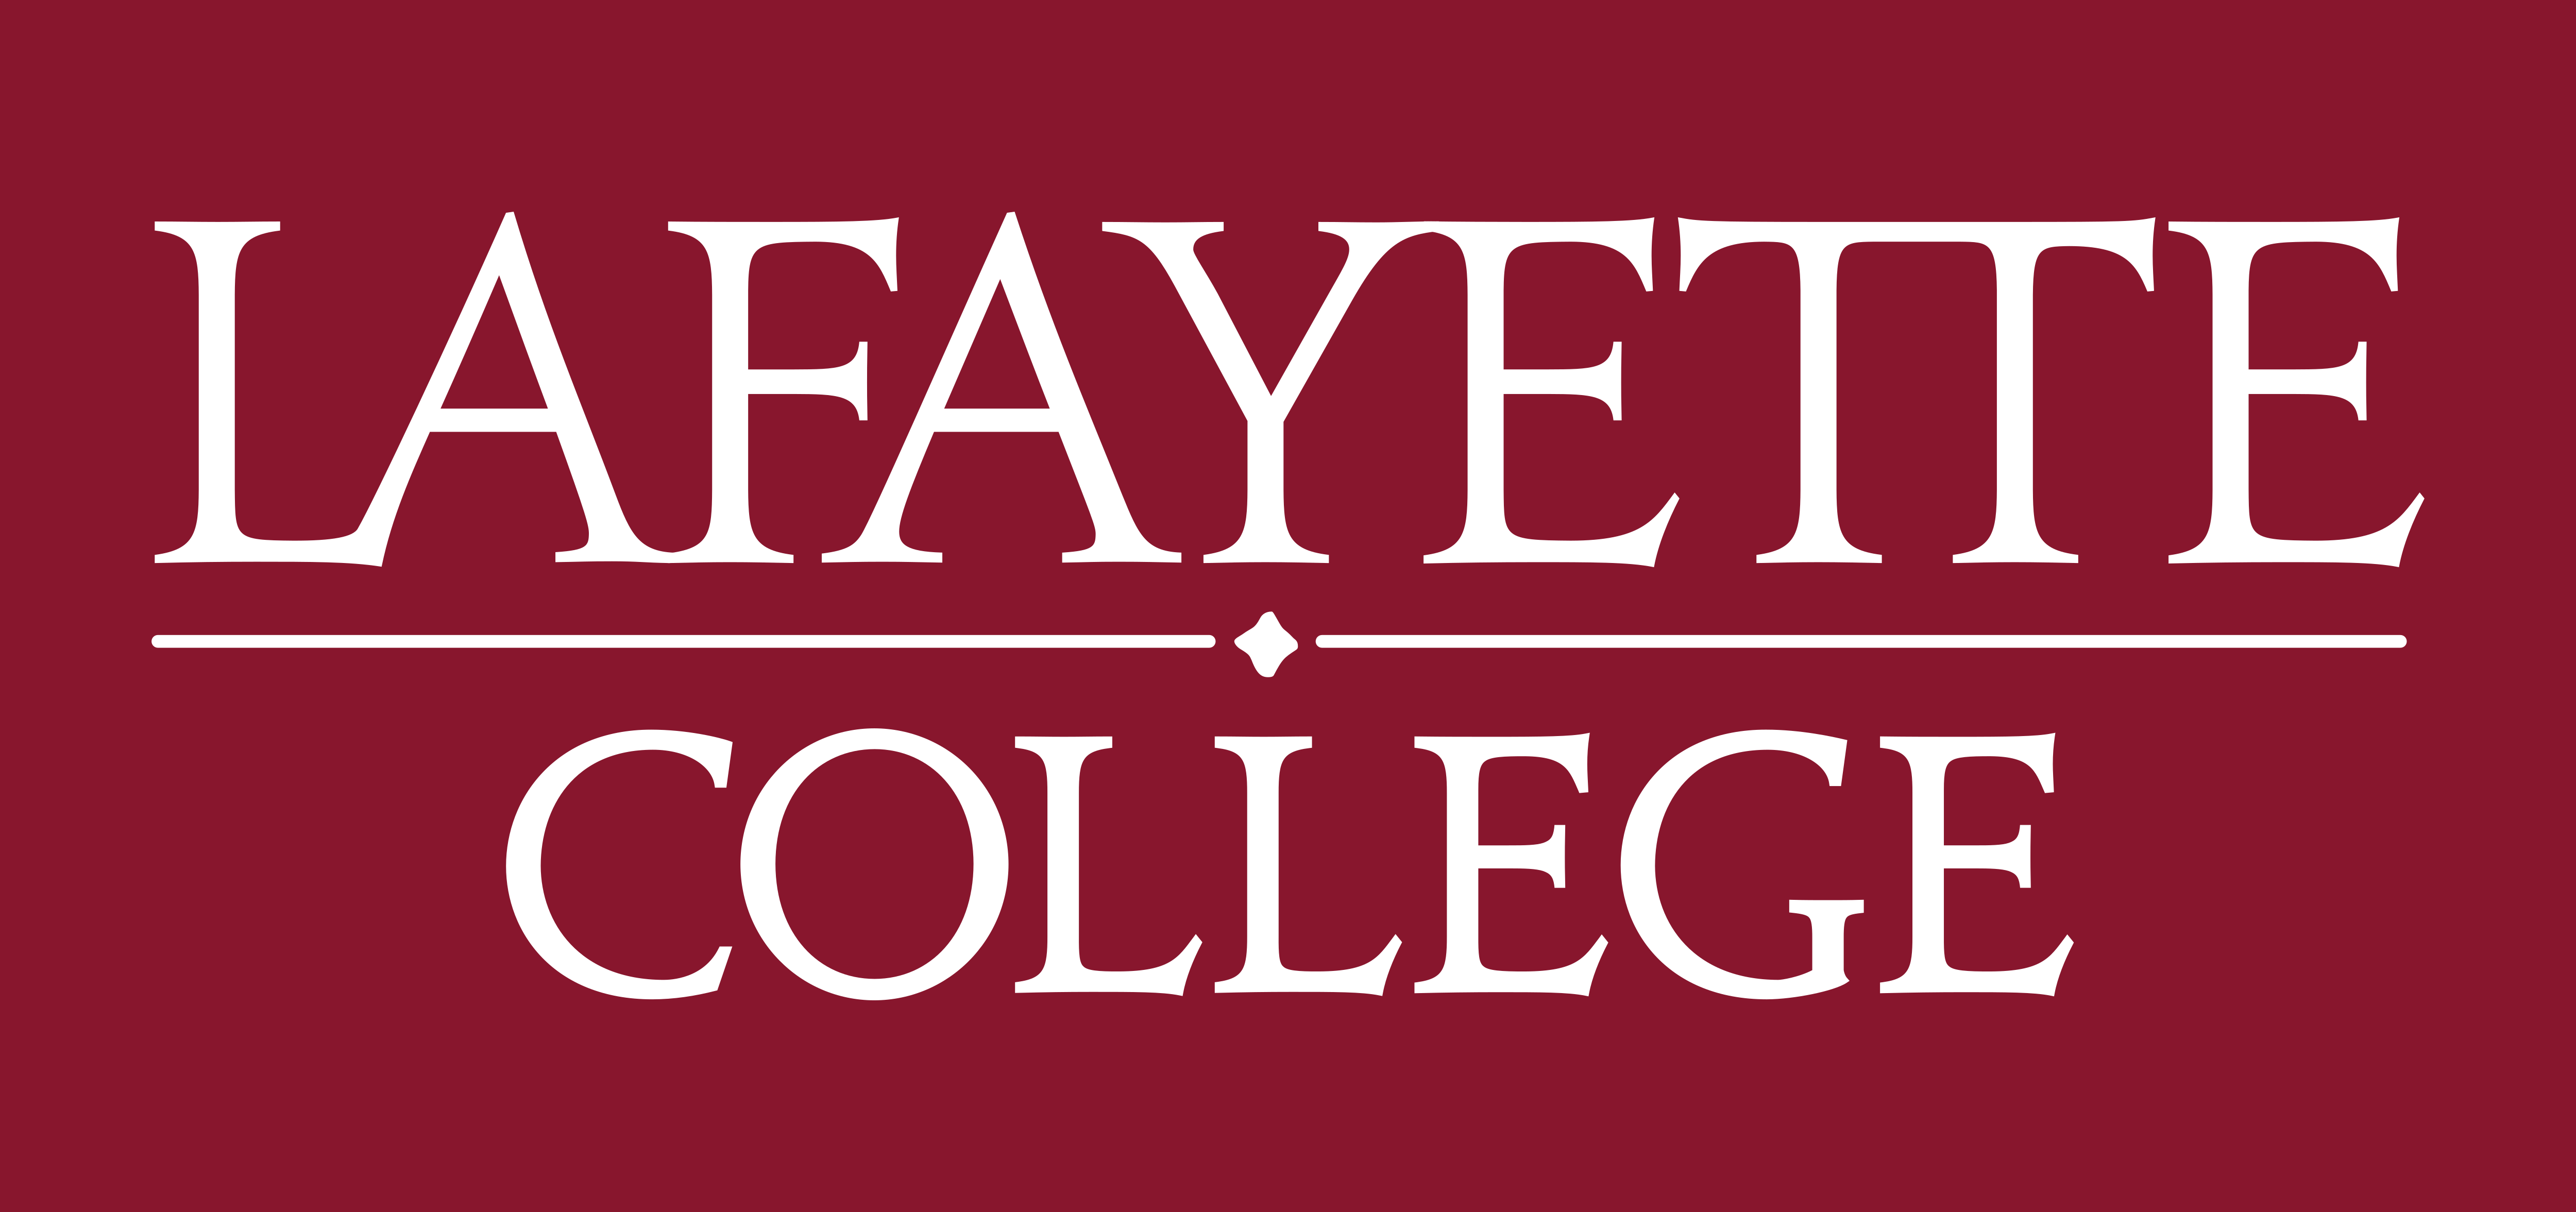 Lafayette College – Logos Download